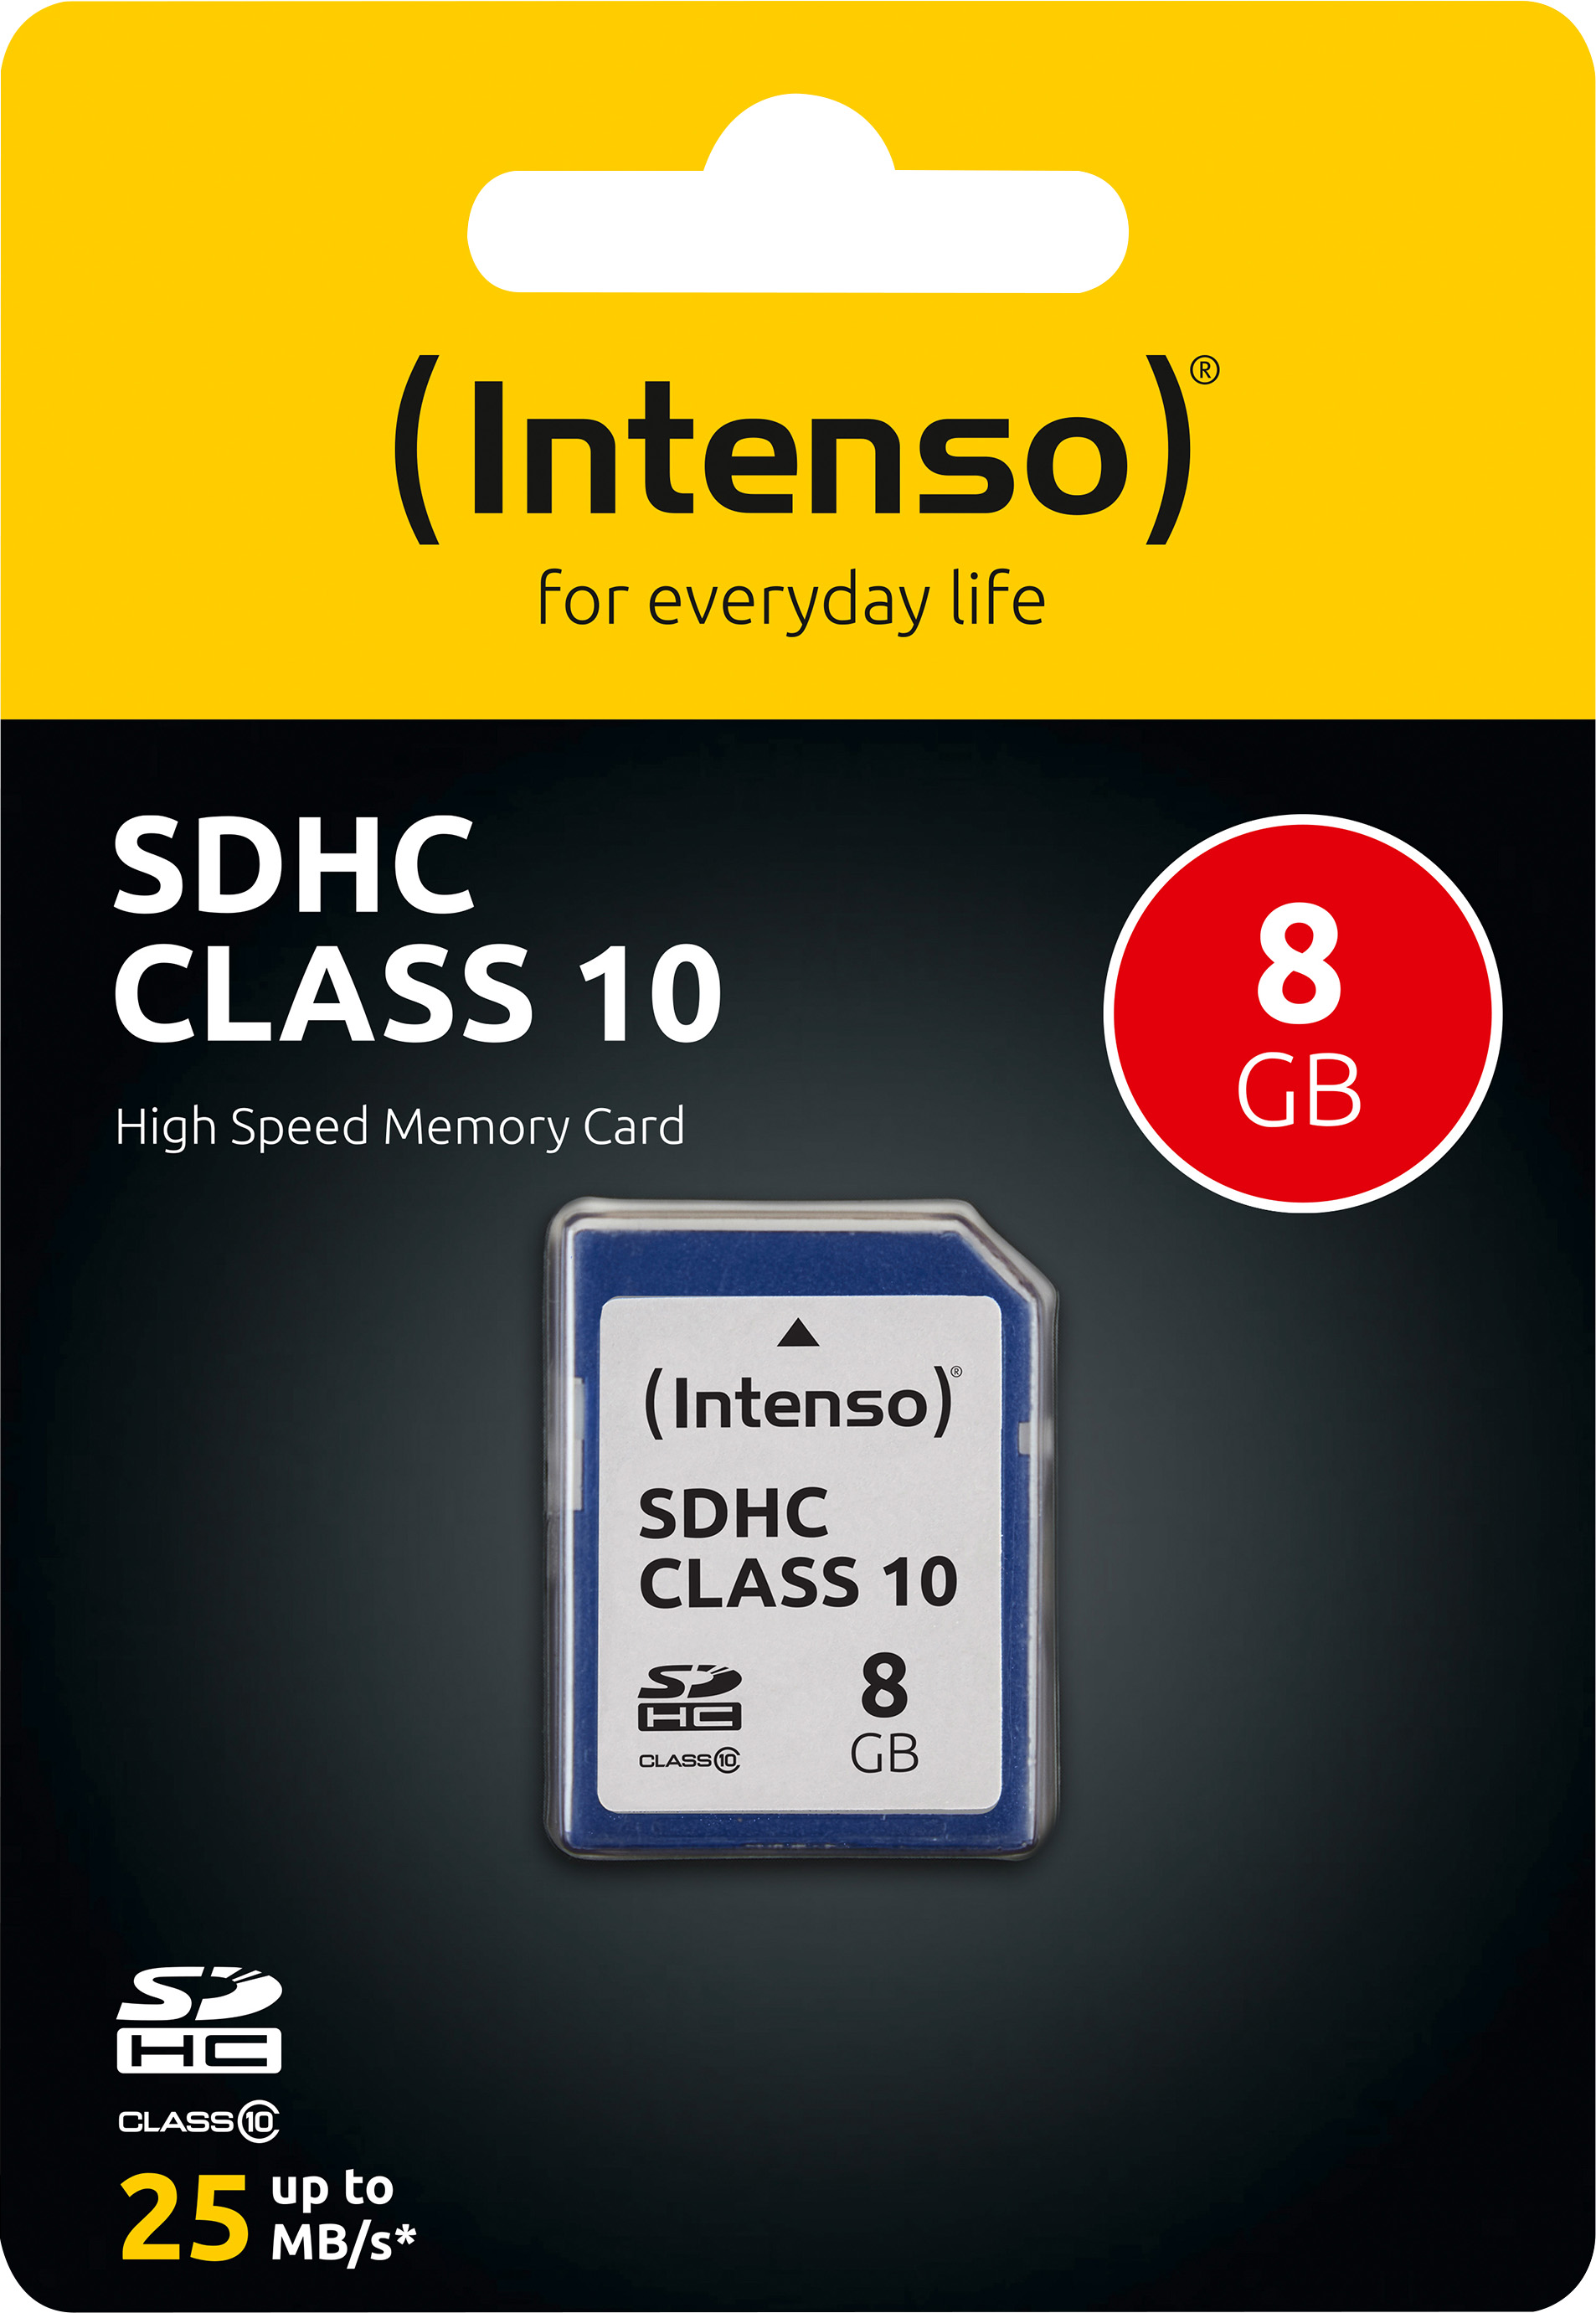 Intenso SDHC-Card 8GB, Class 10 (R) 25MB/s, (W) 10MB/s, Retail-Blister